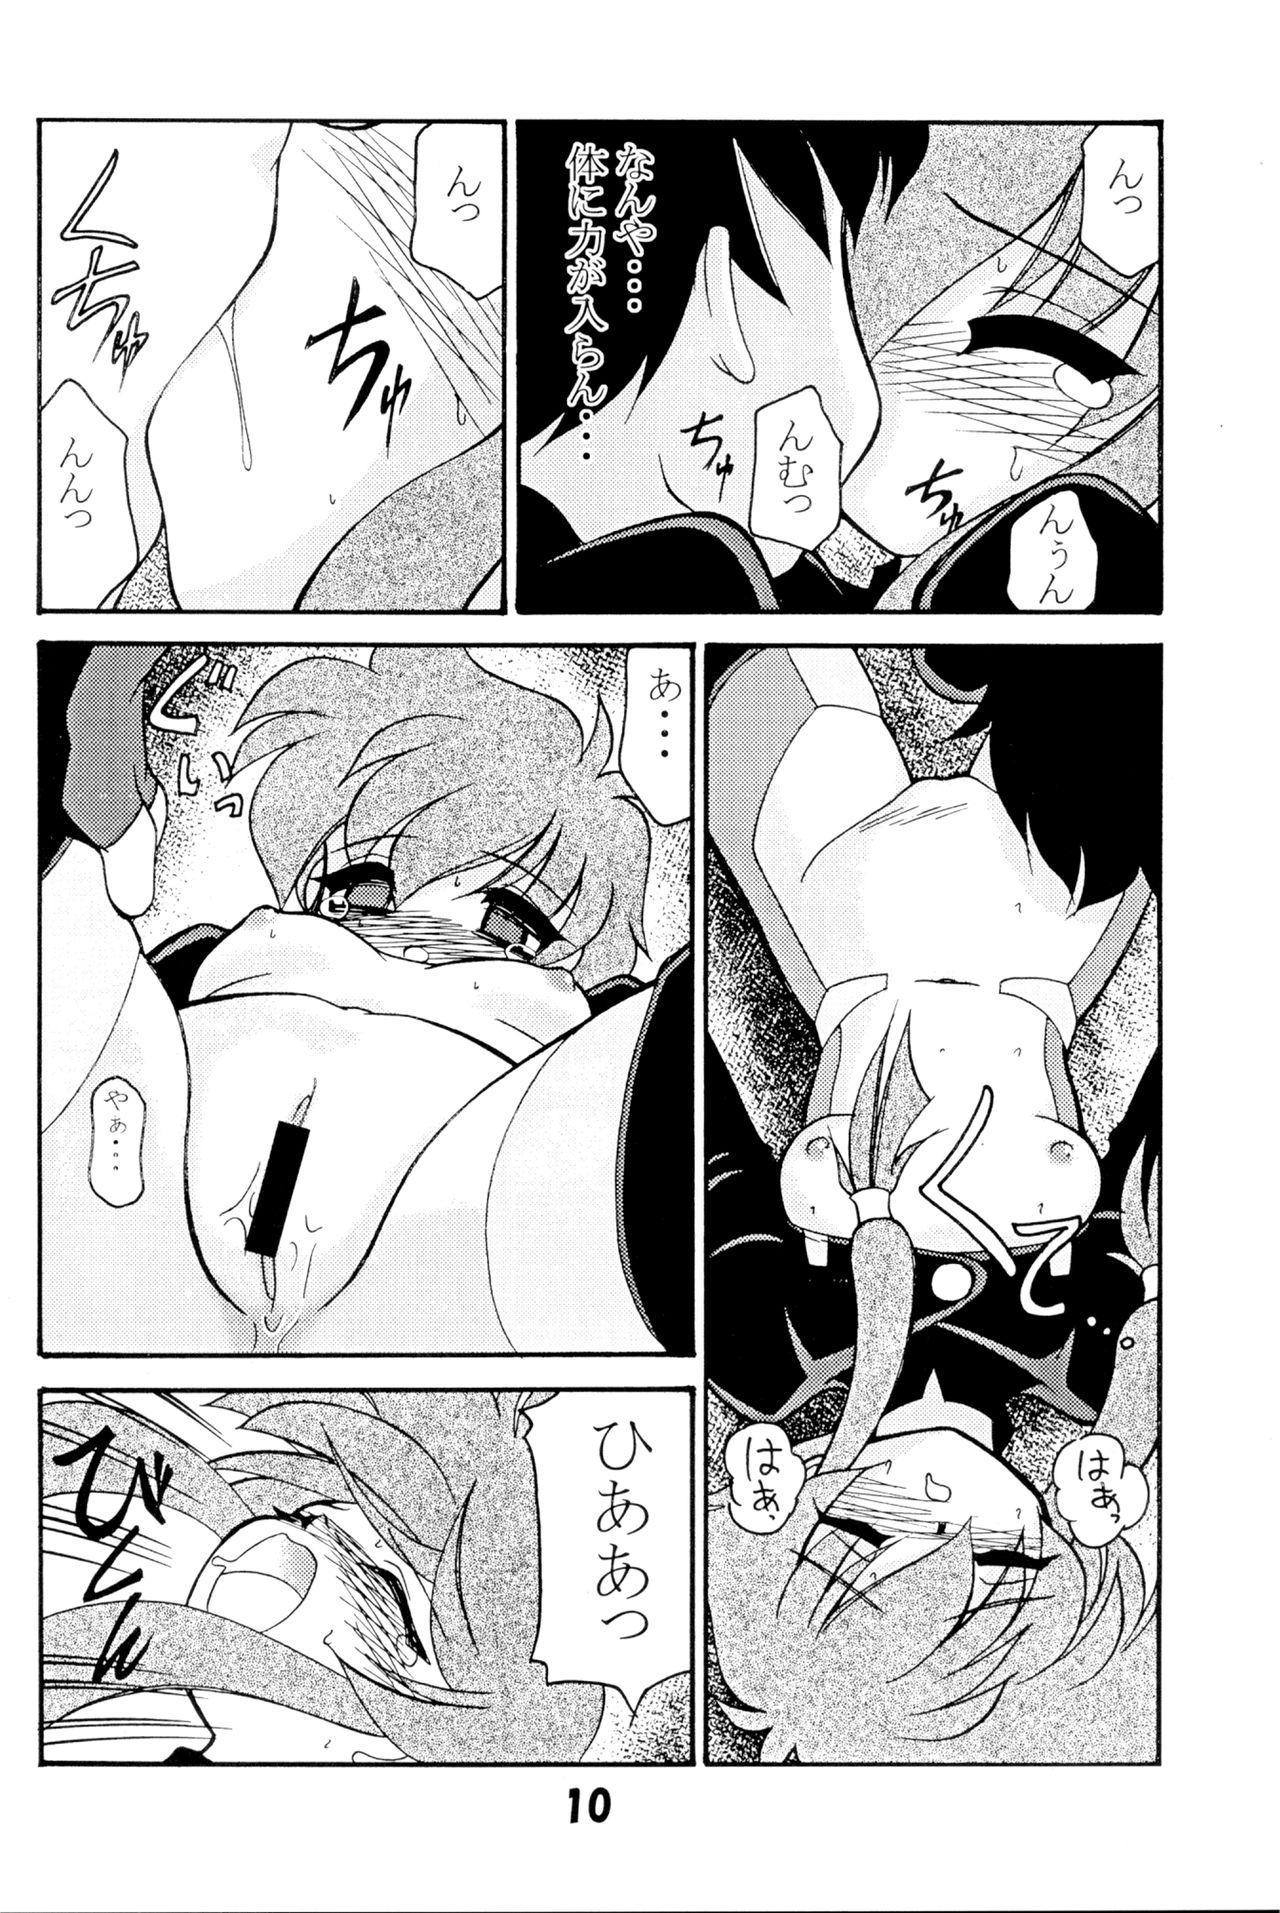 And VERSUS - Magic knight rayearth Angelic layer Plump - Page 9